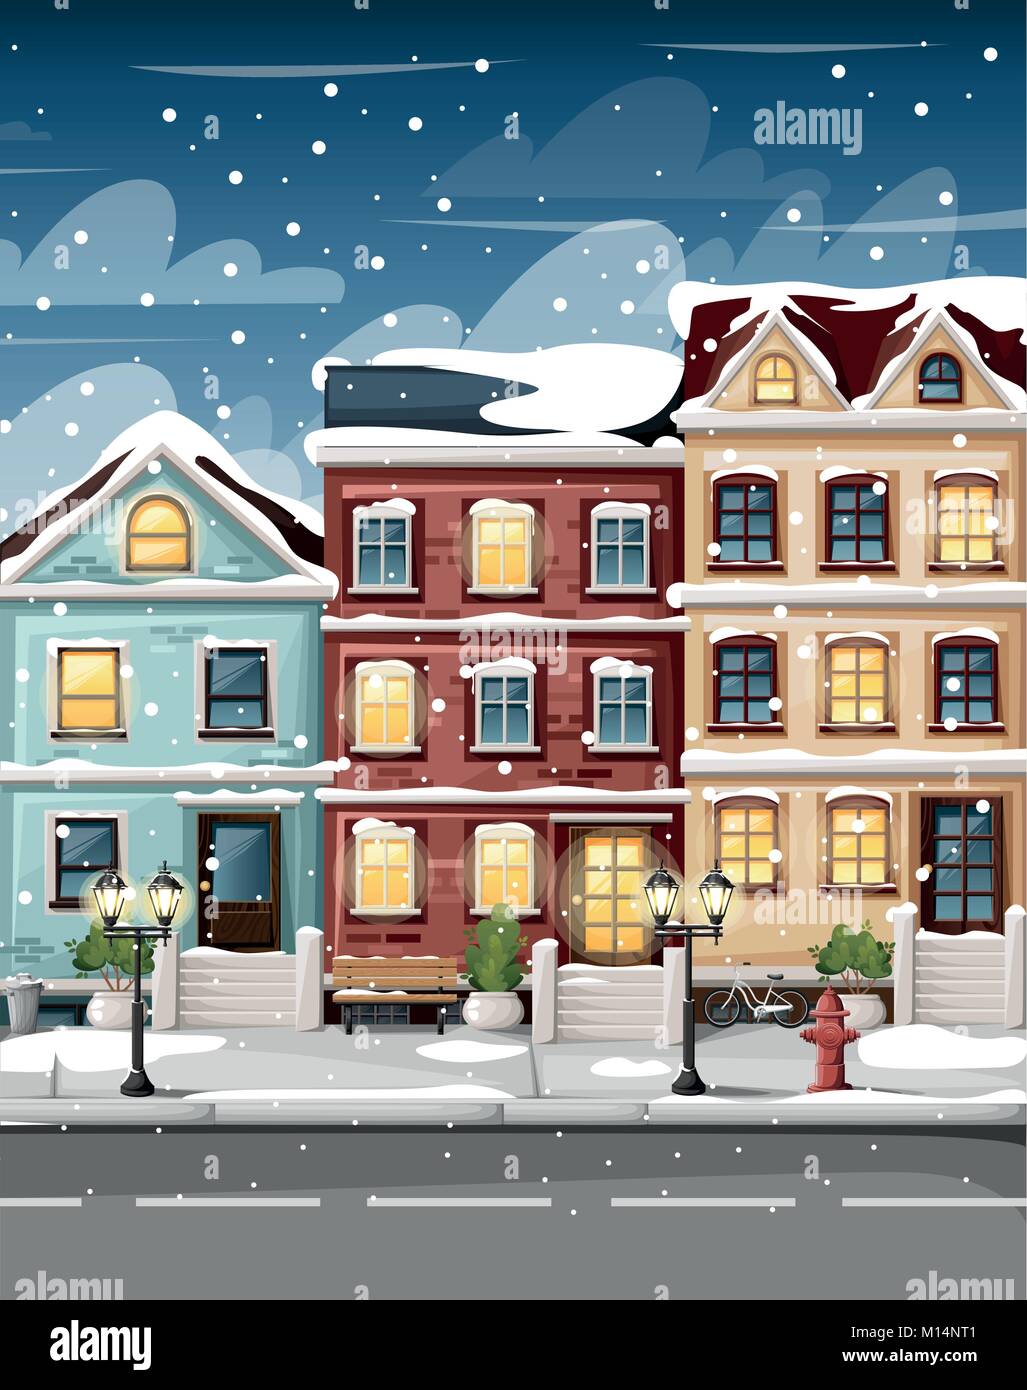 Snow-covered street with colorful houses fire hydrant lights bench and bushes in vases cartoon style vector illustration website page and mobile app d Stock Vector